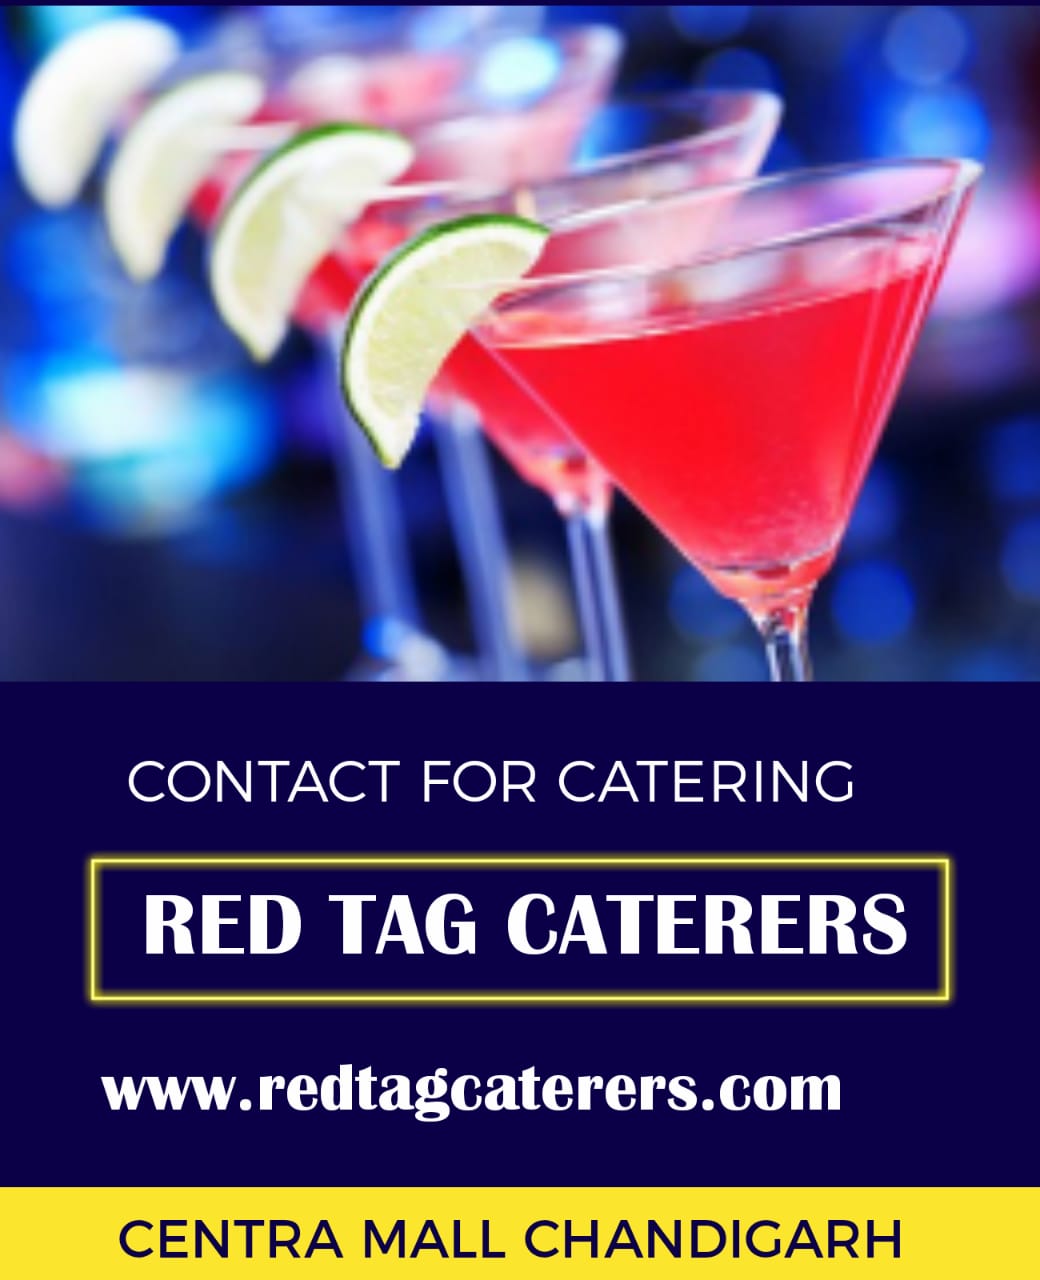 Dedicated to creating unique and signature services by RED TAG caterers in zirakpur Mohali punjab... | Red Tag Caterers | Best Dedicated catering service in zirakpur Mohali punjab,  creative unique catering service in zirakpur Mohali punjab,  Best signaturea catering service in zirakpur Mohali punjab, exclusive catering  - GL46440